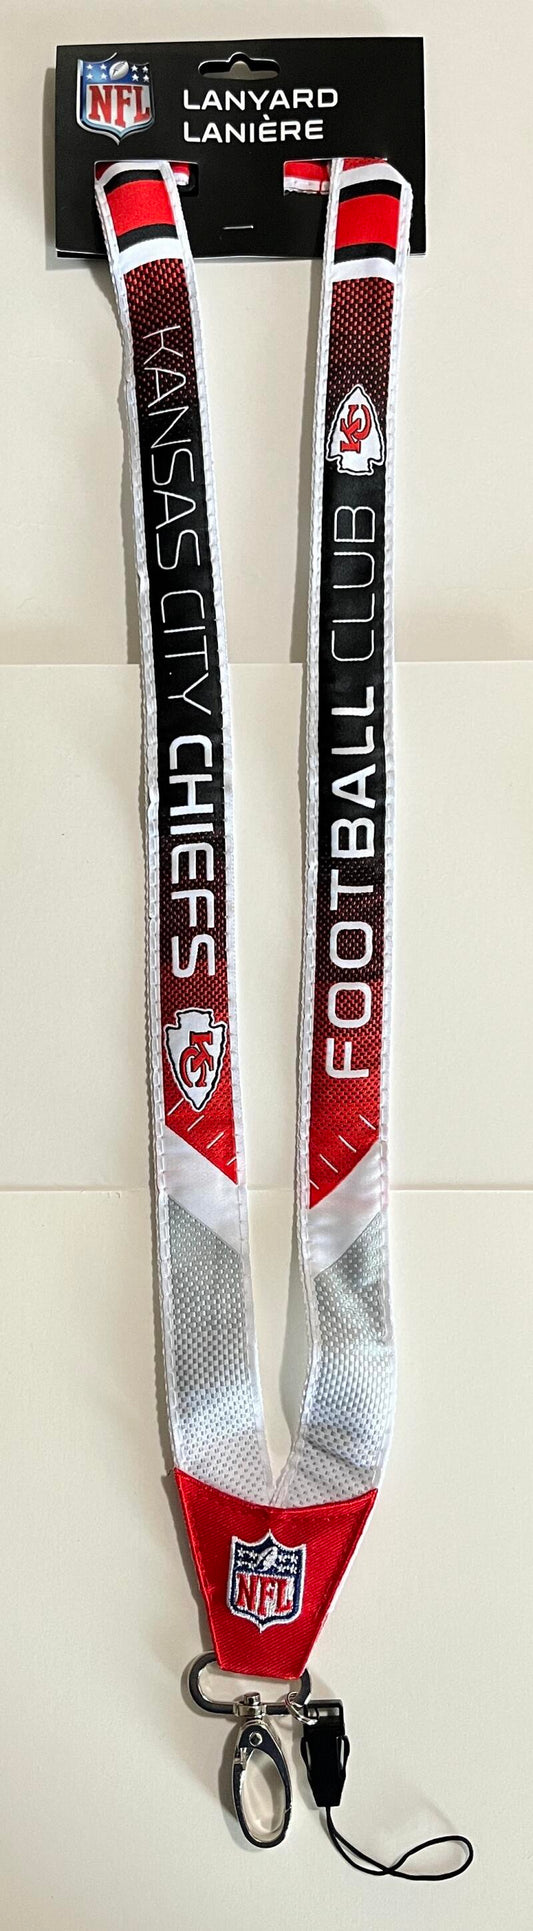 Kansas City Chiefs Woven Licensed NFL Football Lanyard Metal Clasp Image 1